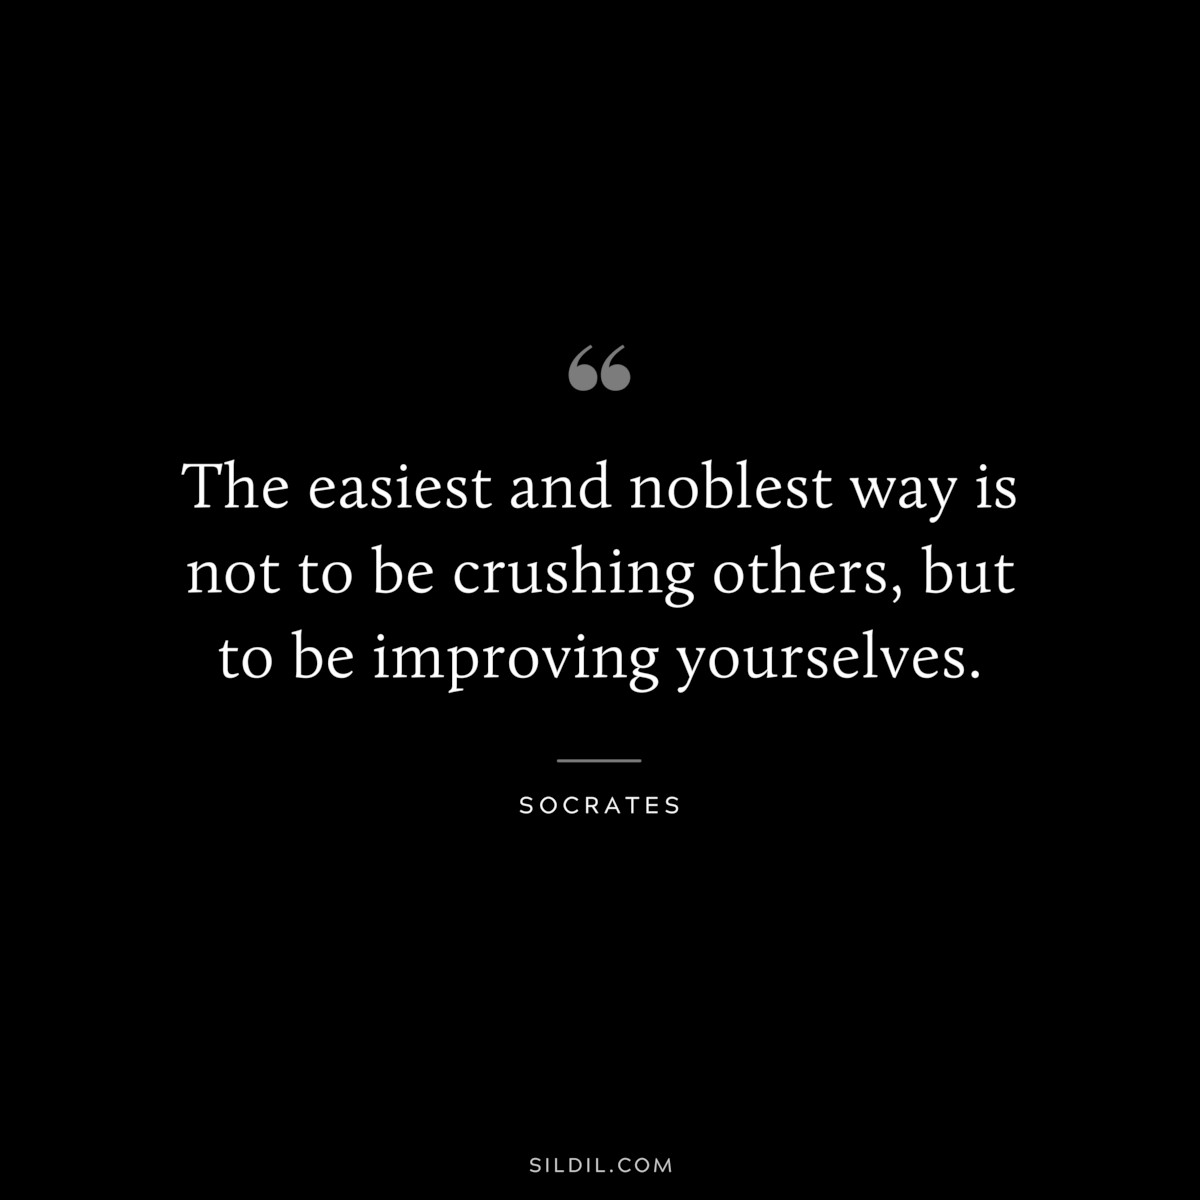 The easiest and noblest way is not to be crushing others, but to be improving yourselves. ― Socrates